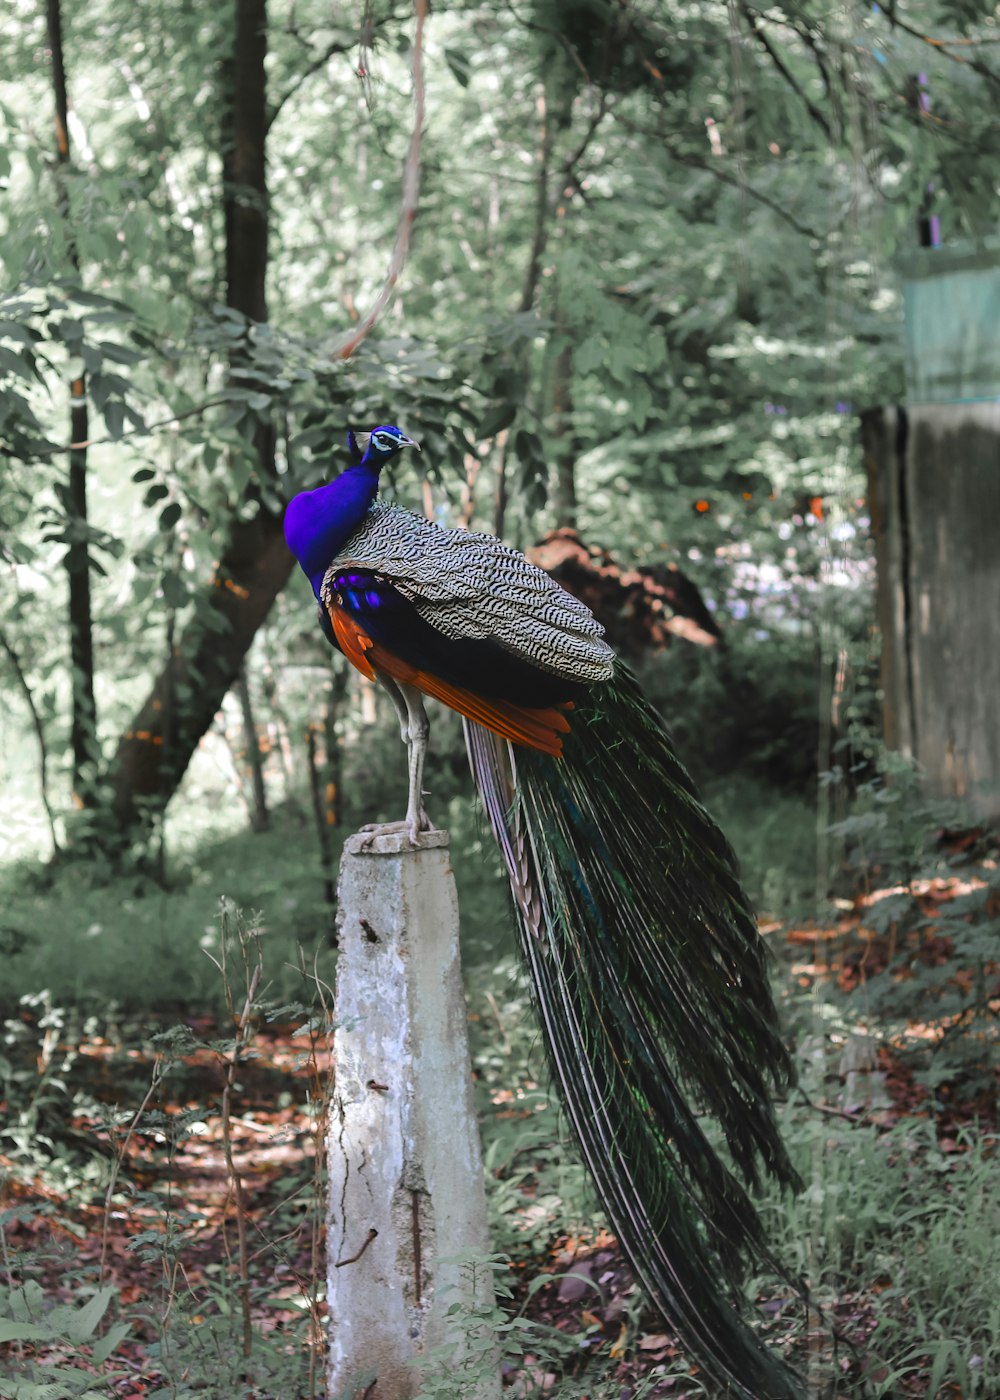 peacock on wooden fence during daytime